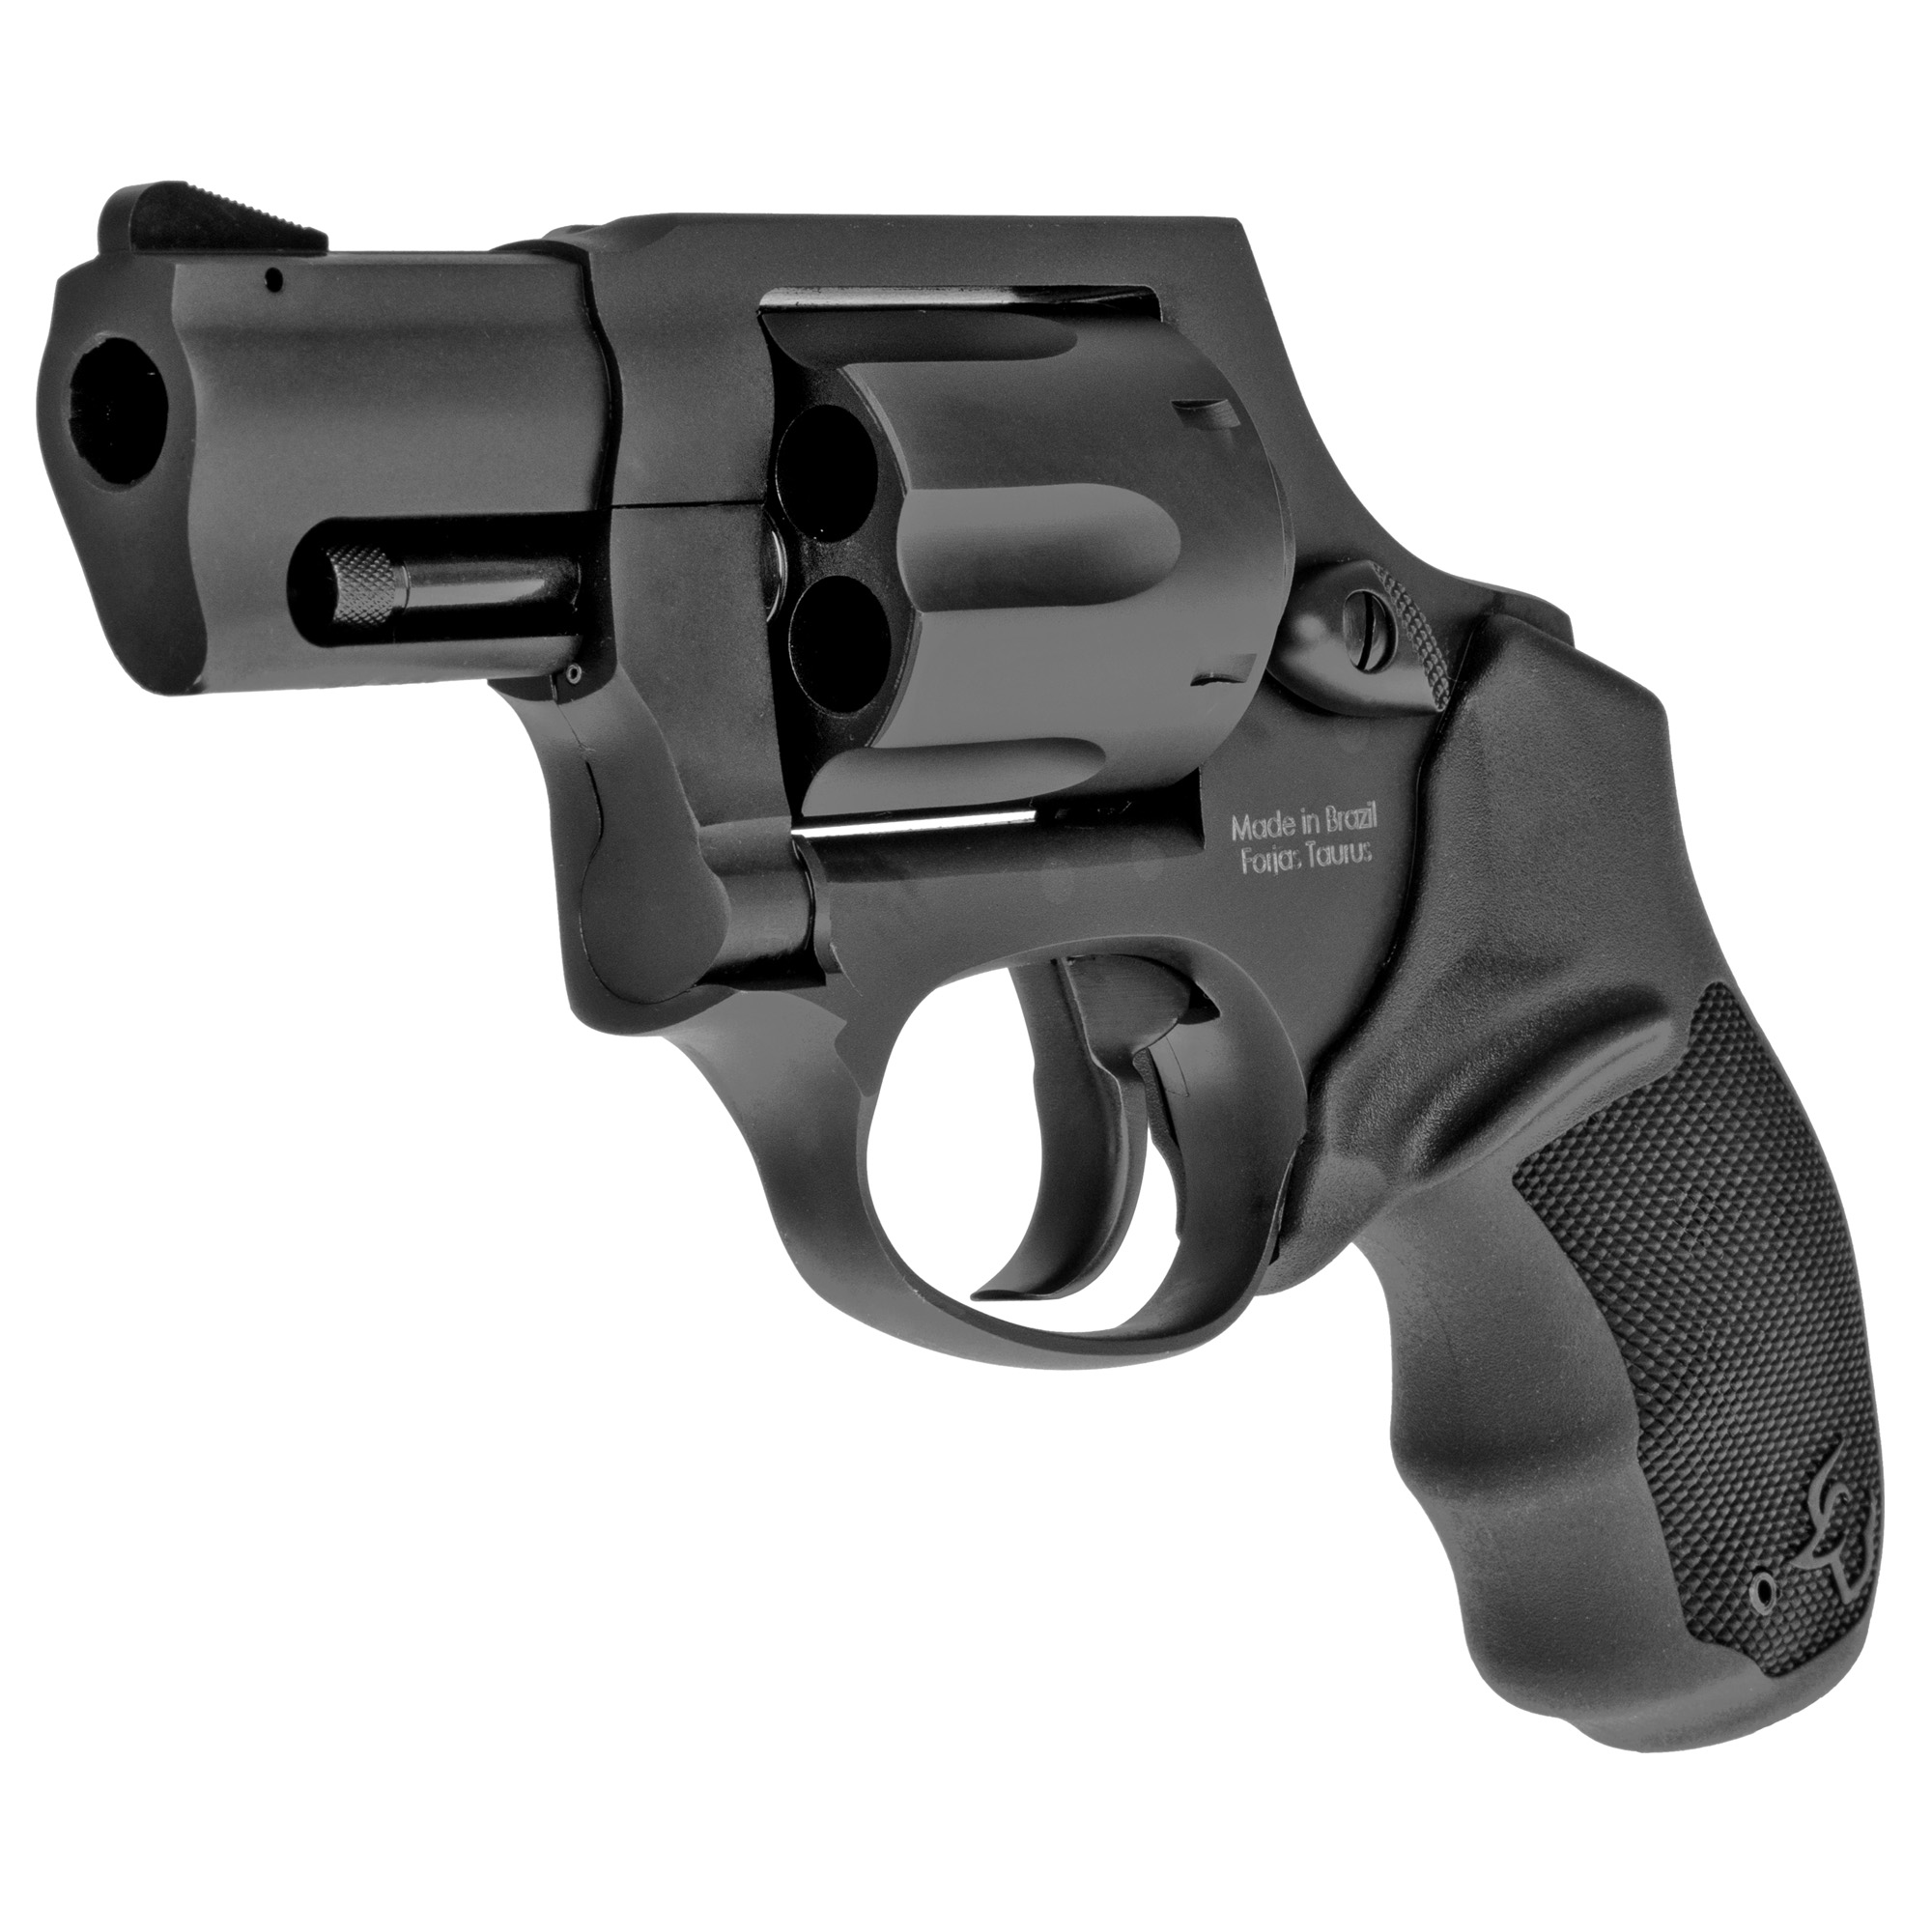 Taurus, Model 856CH, Double Action Only, Metal Frame Revolver, Small Frame, 38 Special, 2" Barrel, Steel, Matte Finish, Black, Rubber Grips, Fixed Sights, 6 Rounds, Concealed Hammer